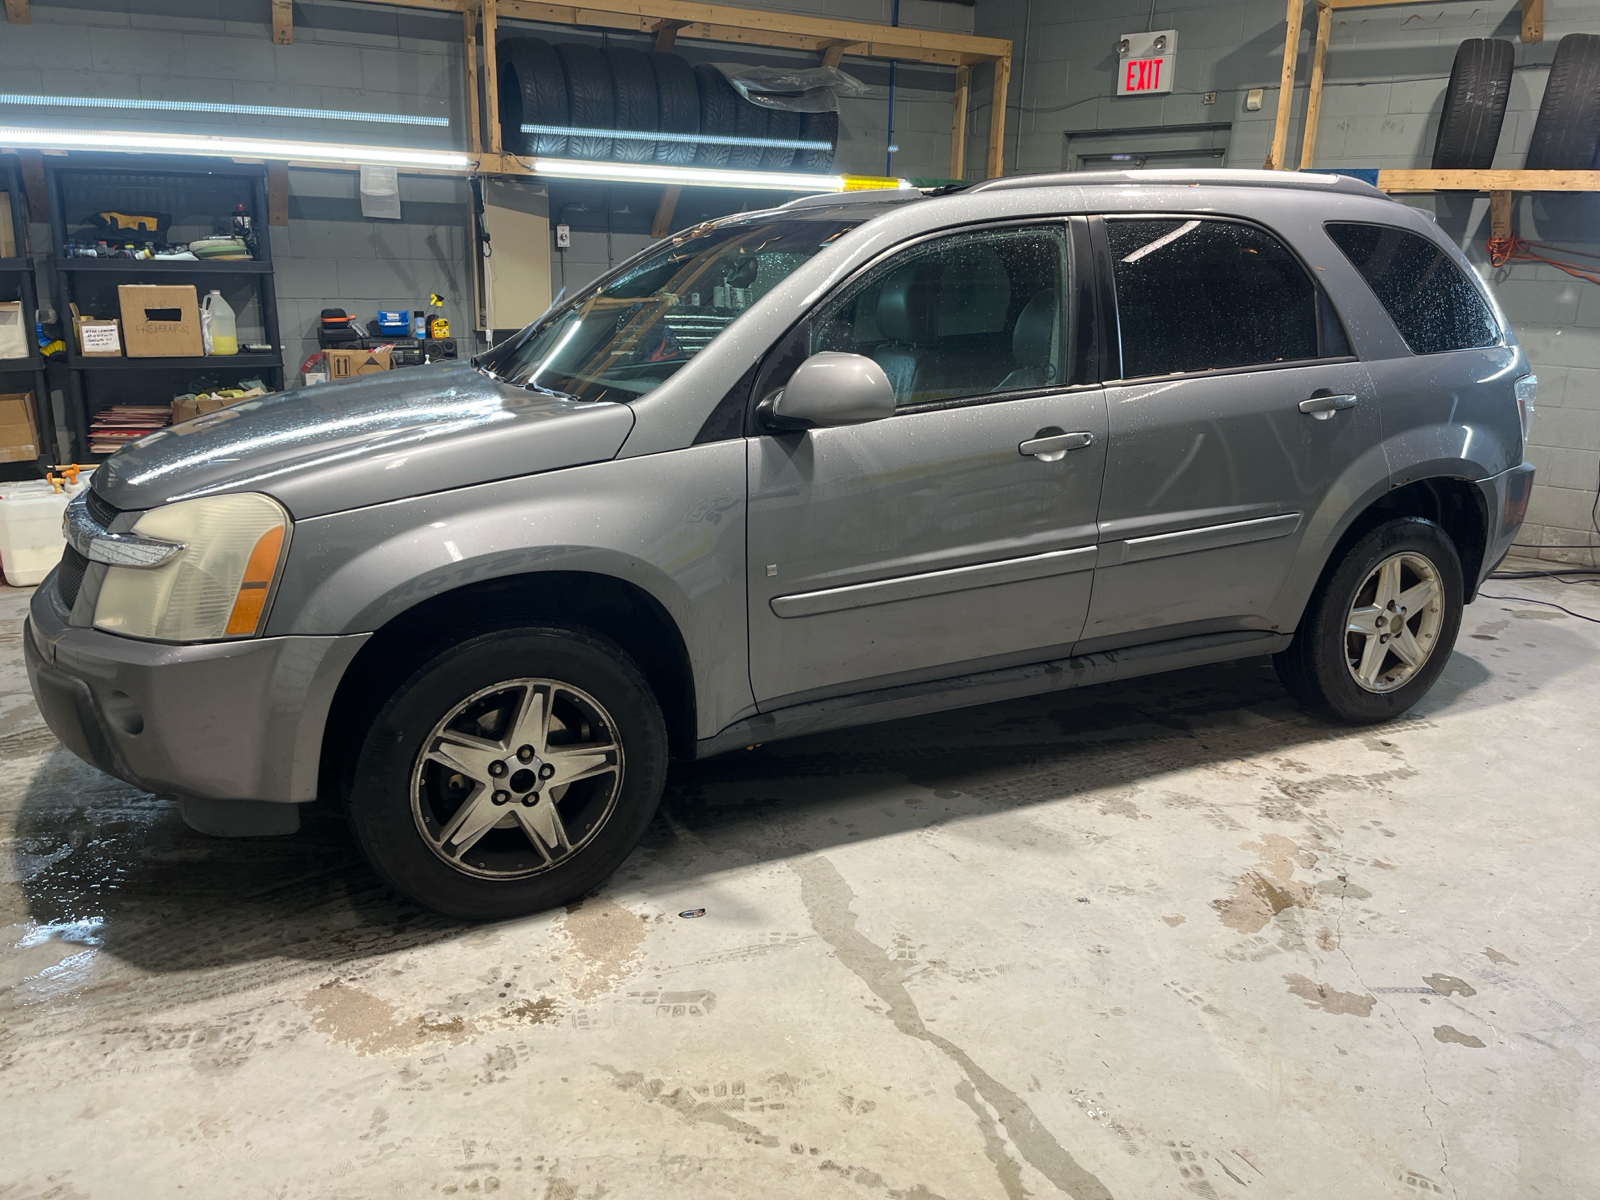 2006 Chevrolet Equinox *** AS-IS SALE *** YOU CERTIFY & YOU SAVE!!! *** S